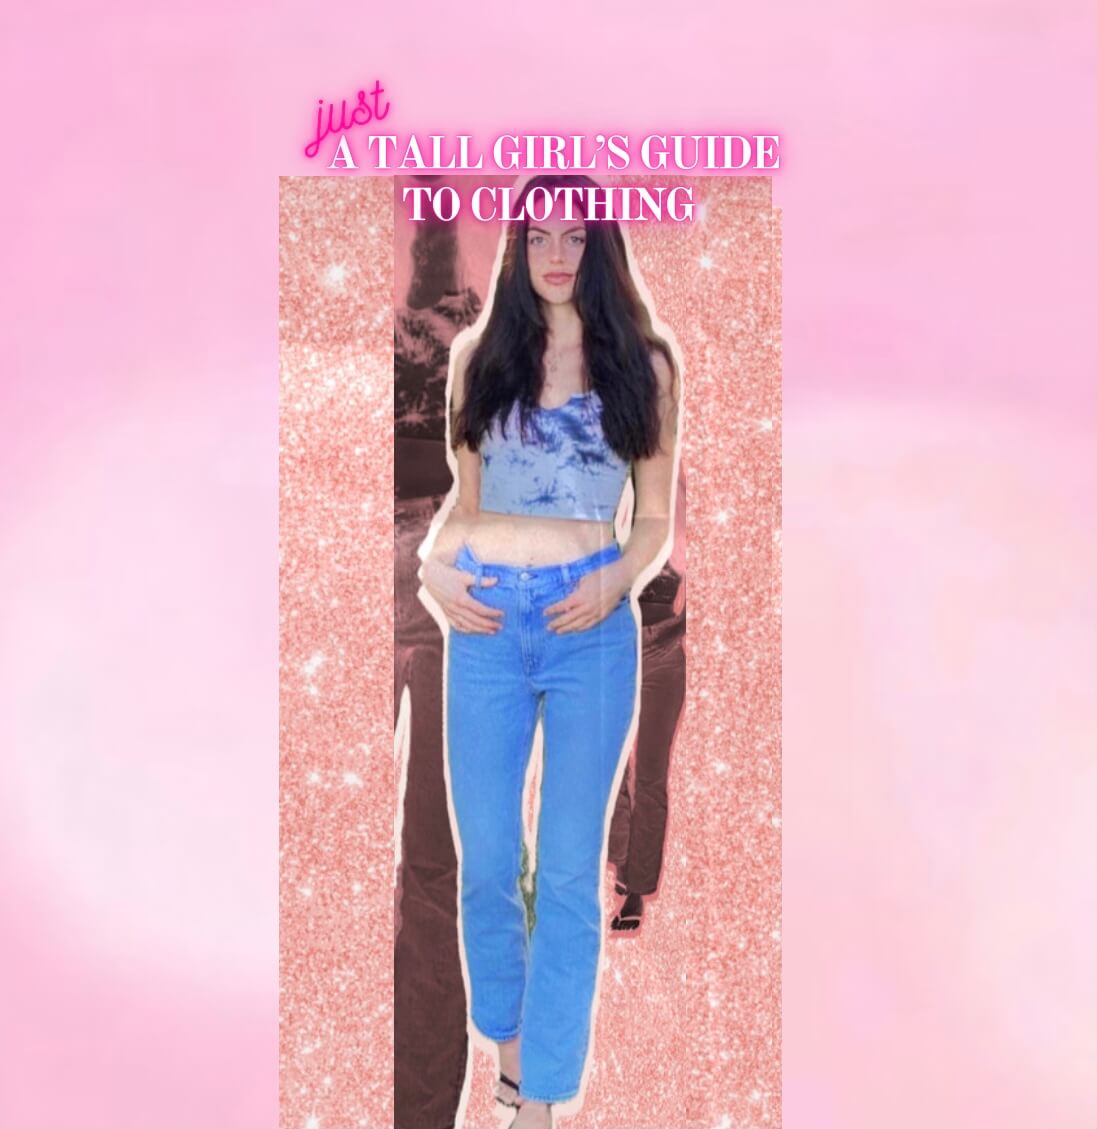 Image of Maddie In Abercrombie Jeans with A pink Background that says just a tall girl's guide to clothing